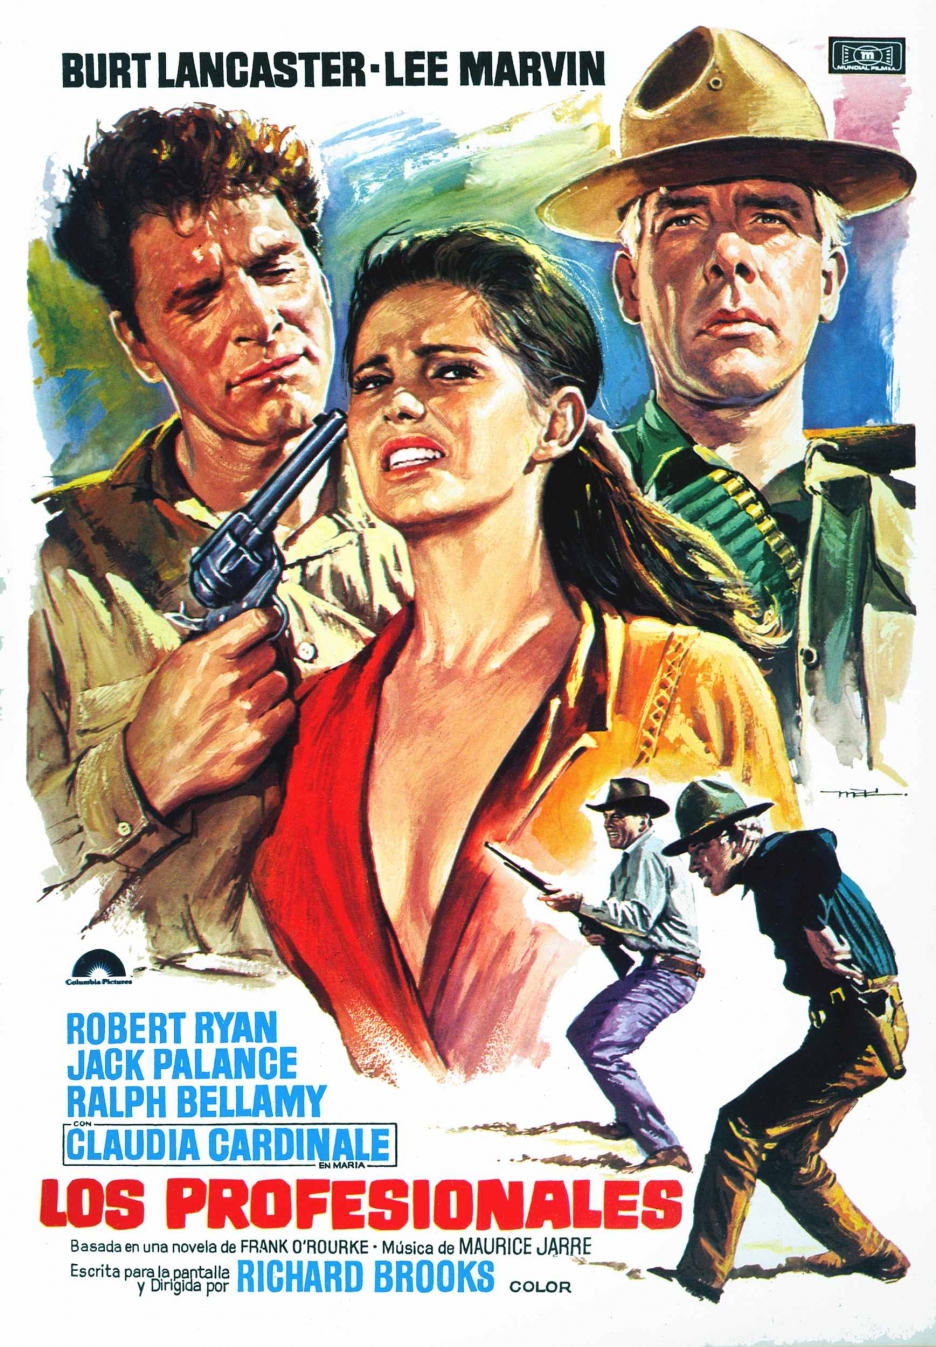 Poster for The Professionals